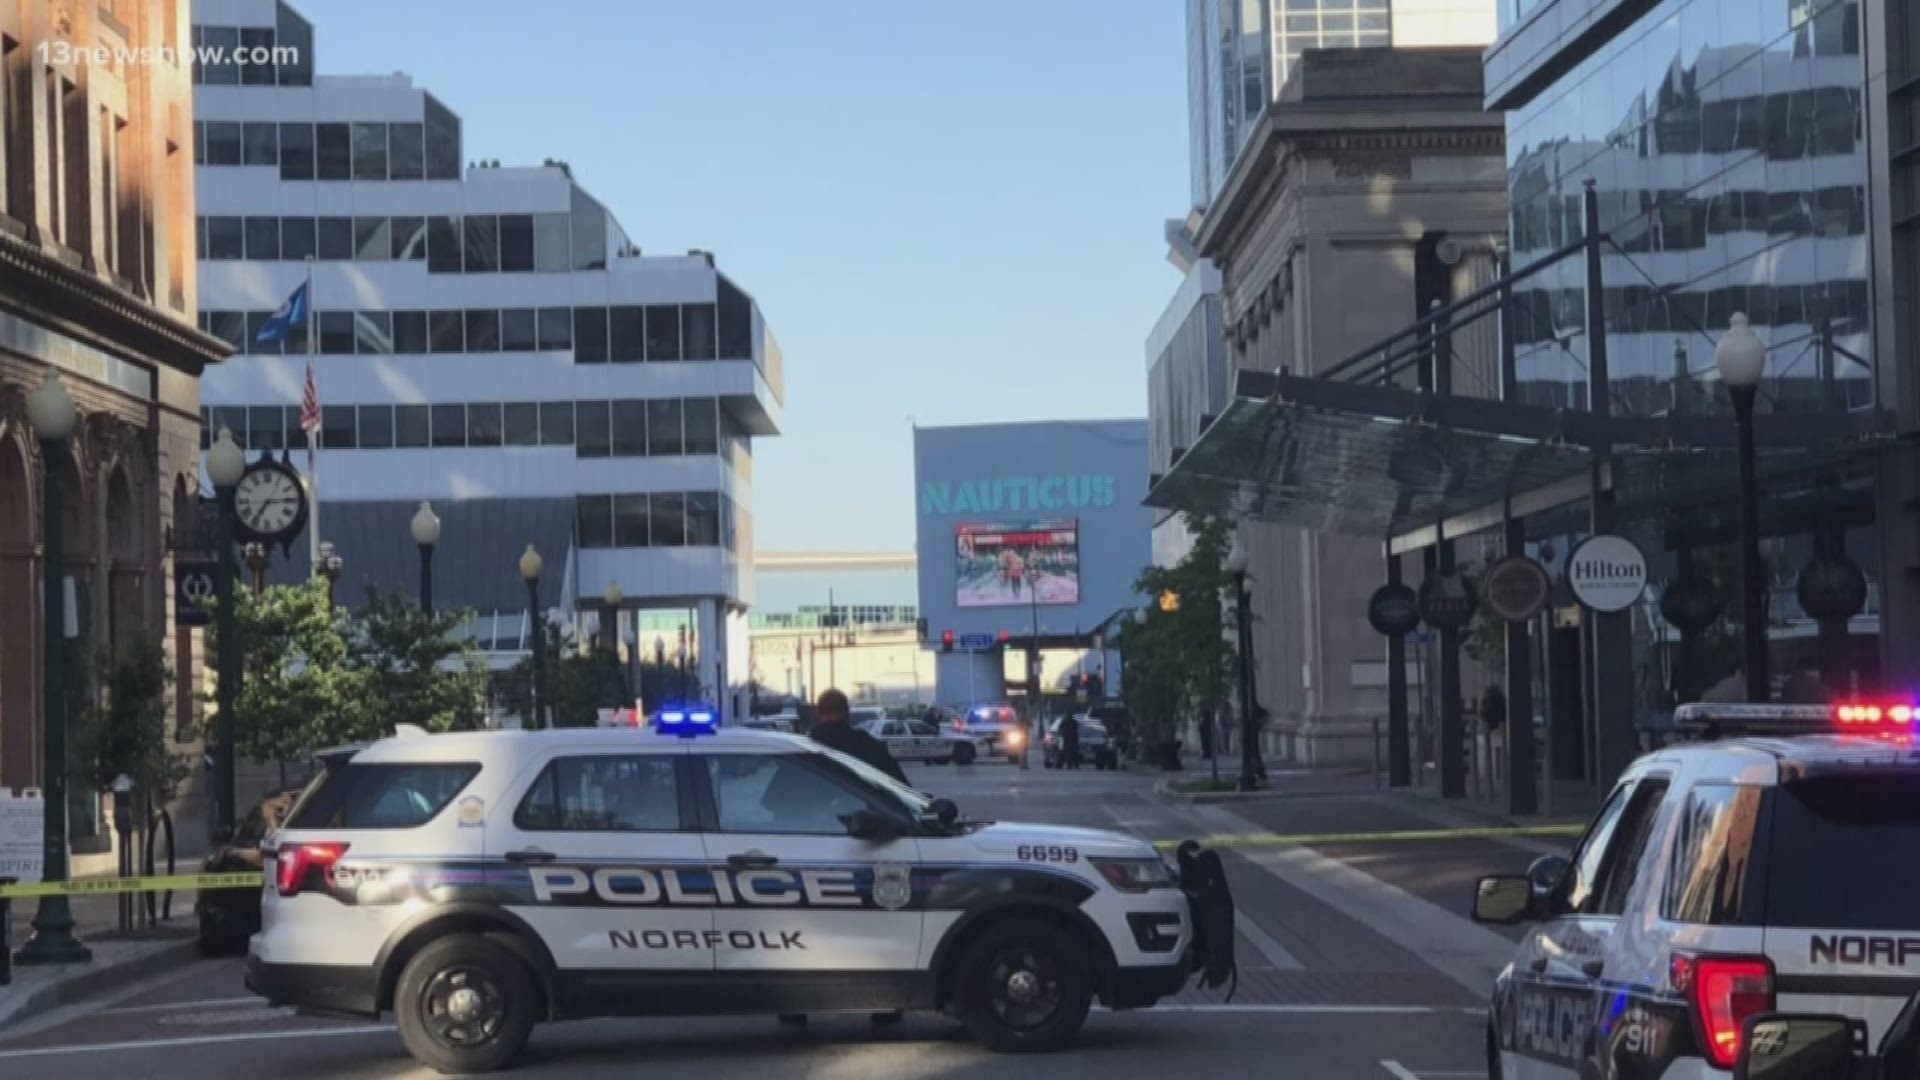 A man has been arrested after a bomb threat was made at a Norfolk hotel.